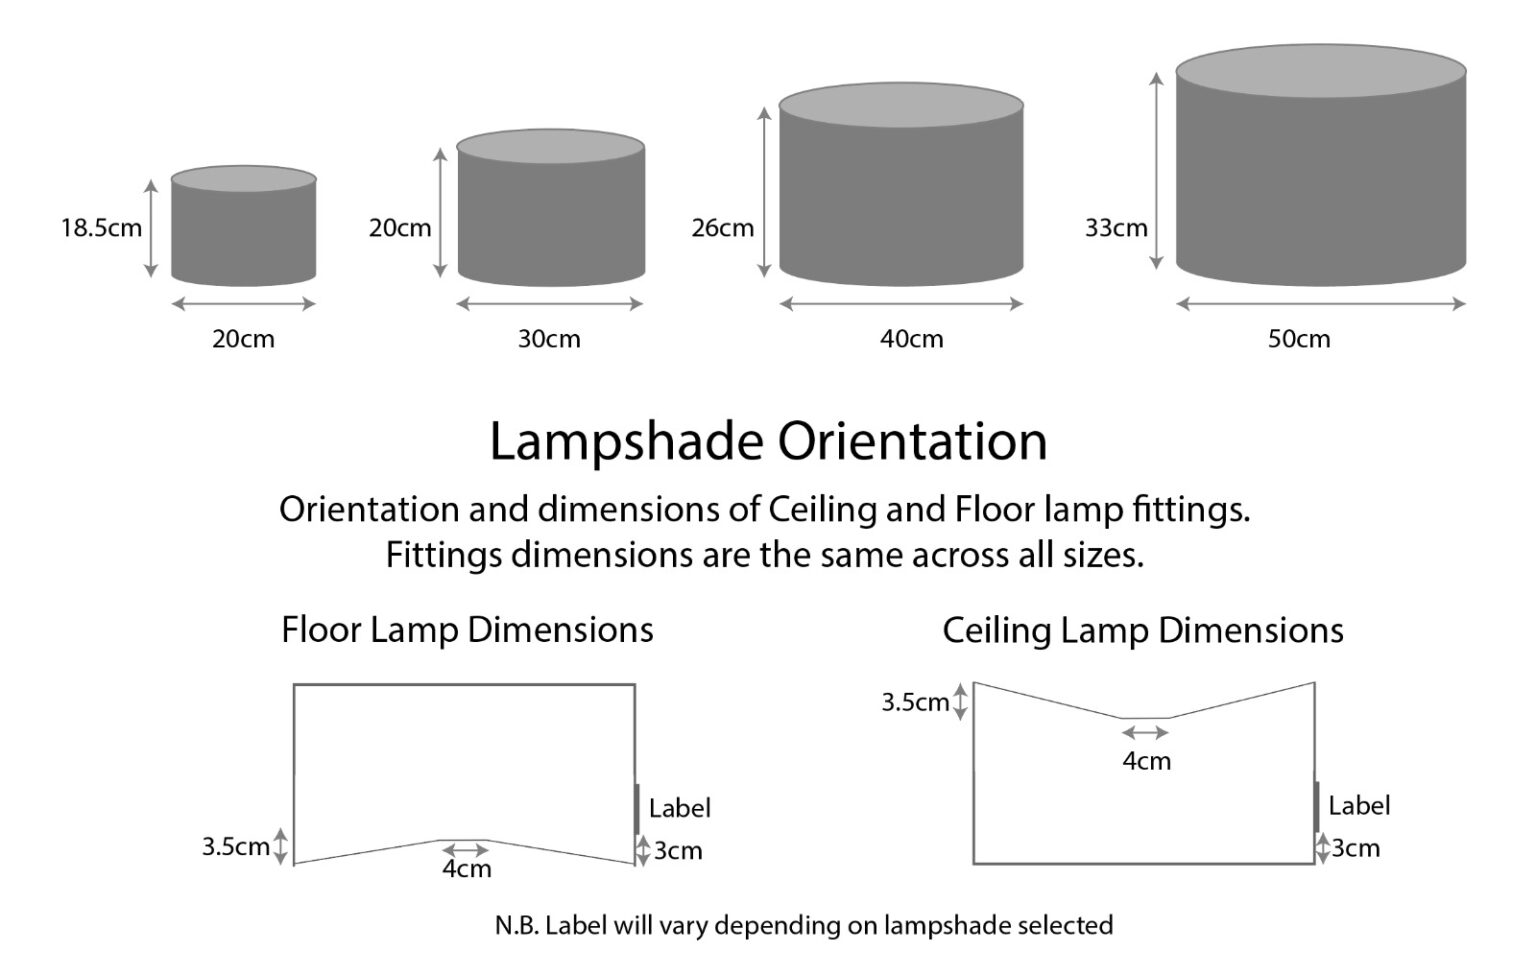 Lampshade Dimensions 20Cm By 18.5Cm, 30Cm By 20Cm, 40Cm By 26Cm, 50Cm By 33Cm